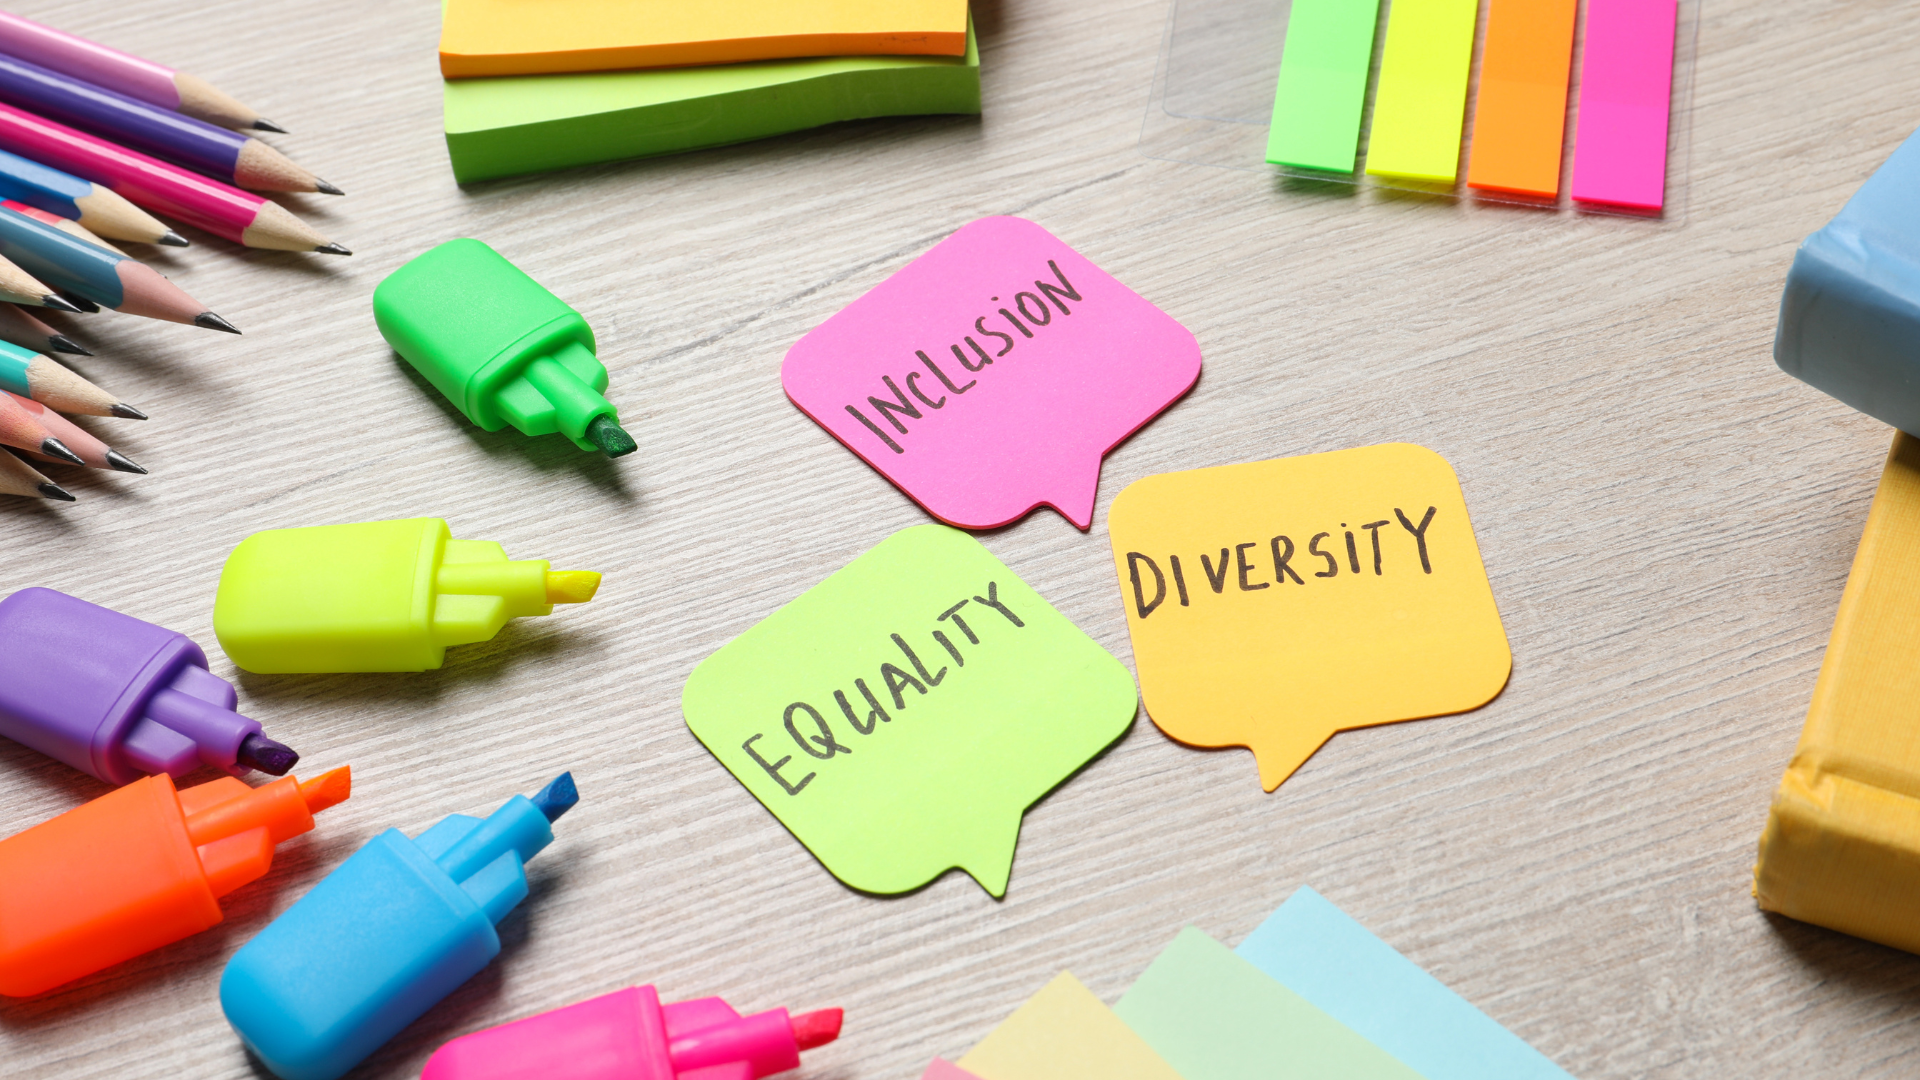 Inclusion, Equality, and Diversity written on post-it notes